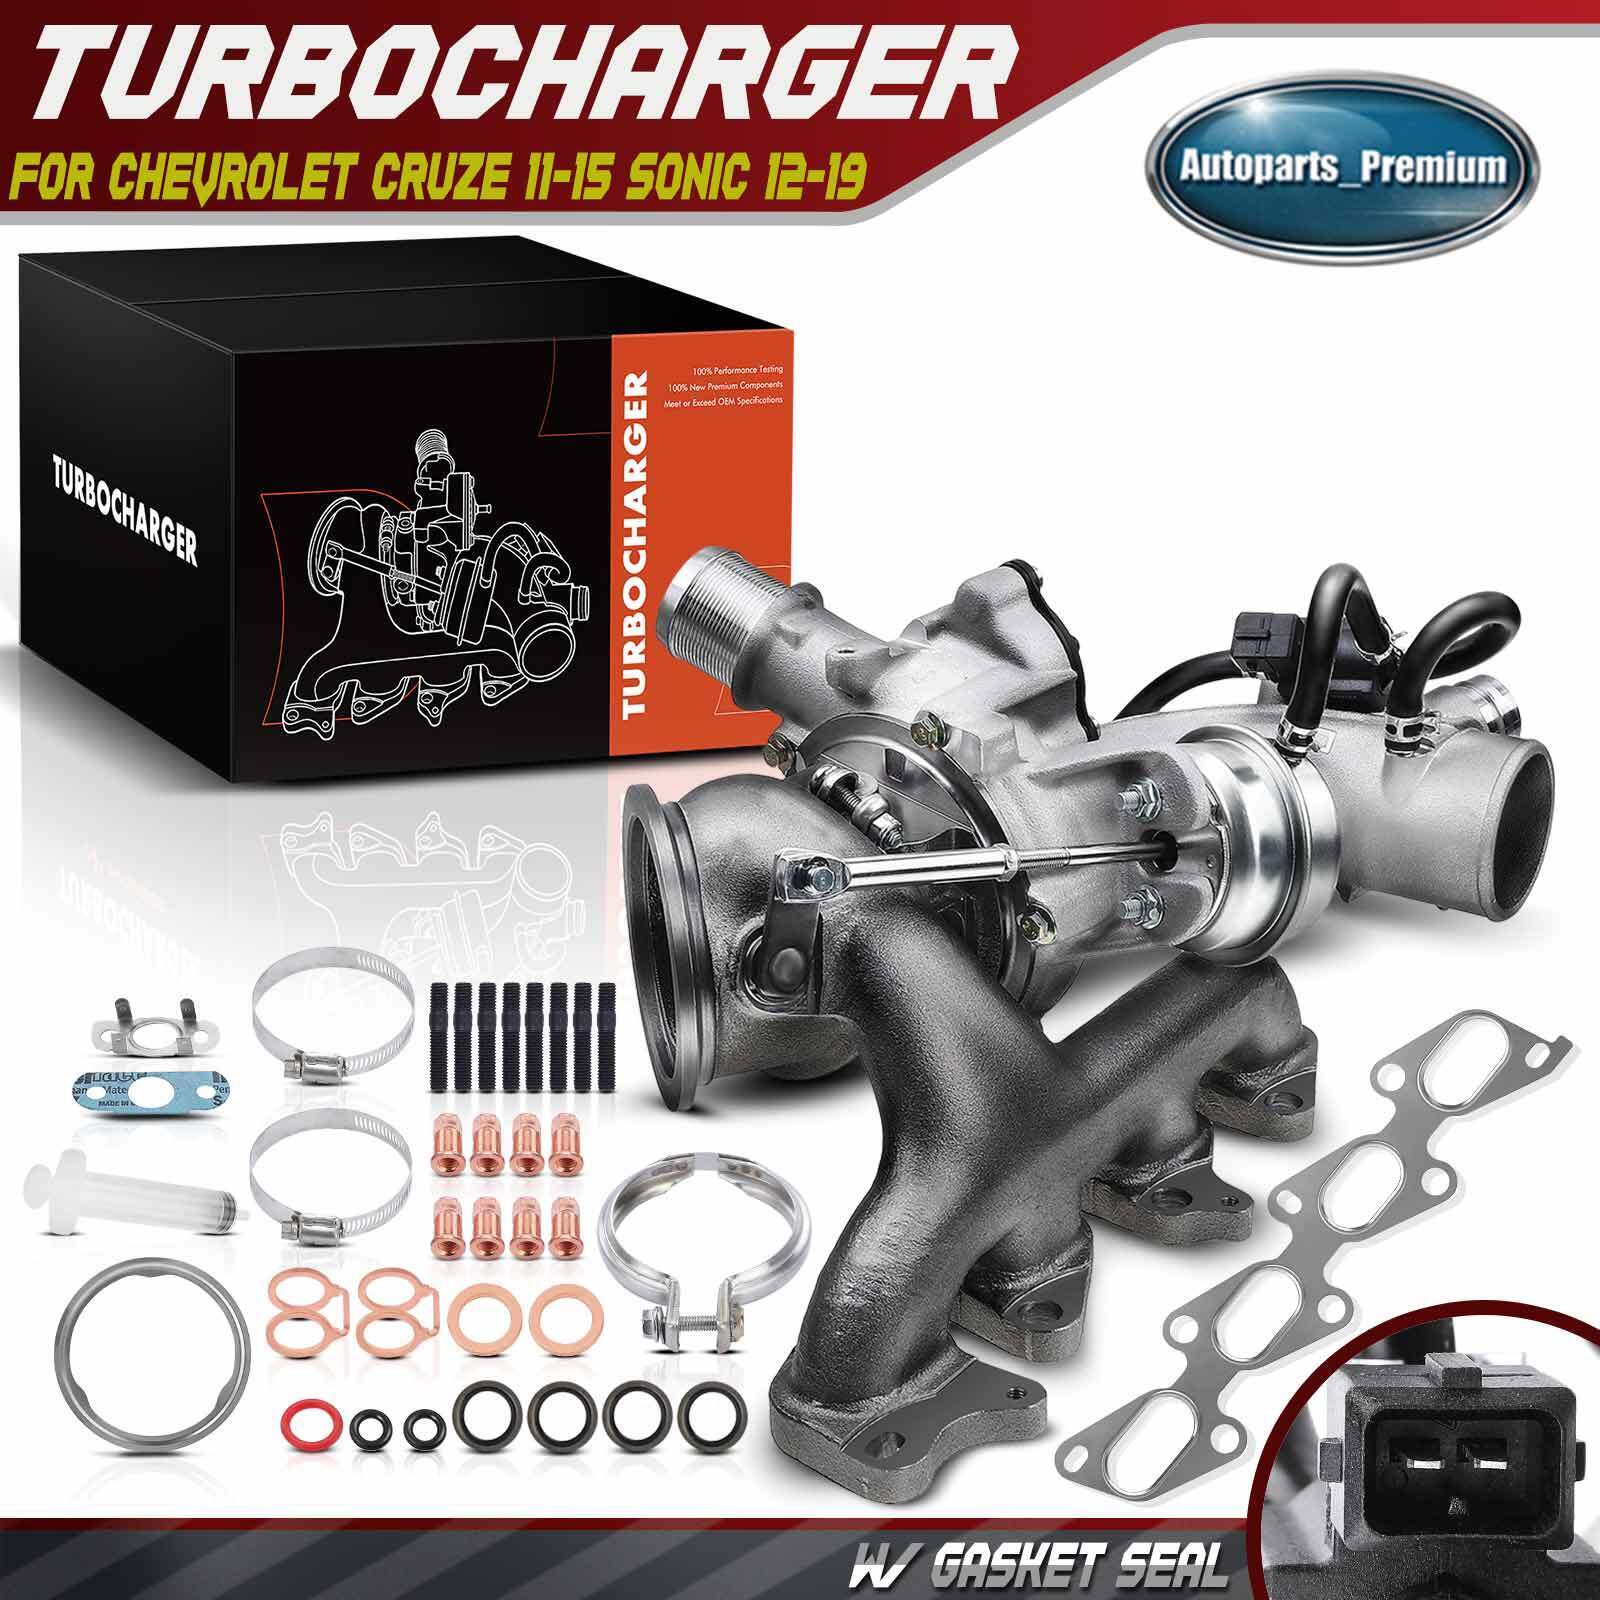 Complete Turbo Turbocharger & Kit for Chevy Cruze Sonic Trax & Buick Encore 1.4L